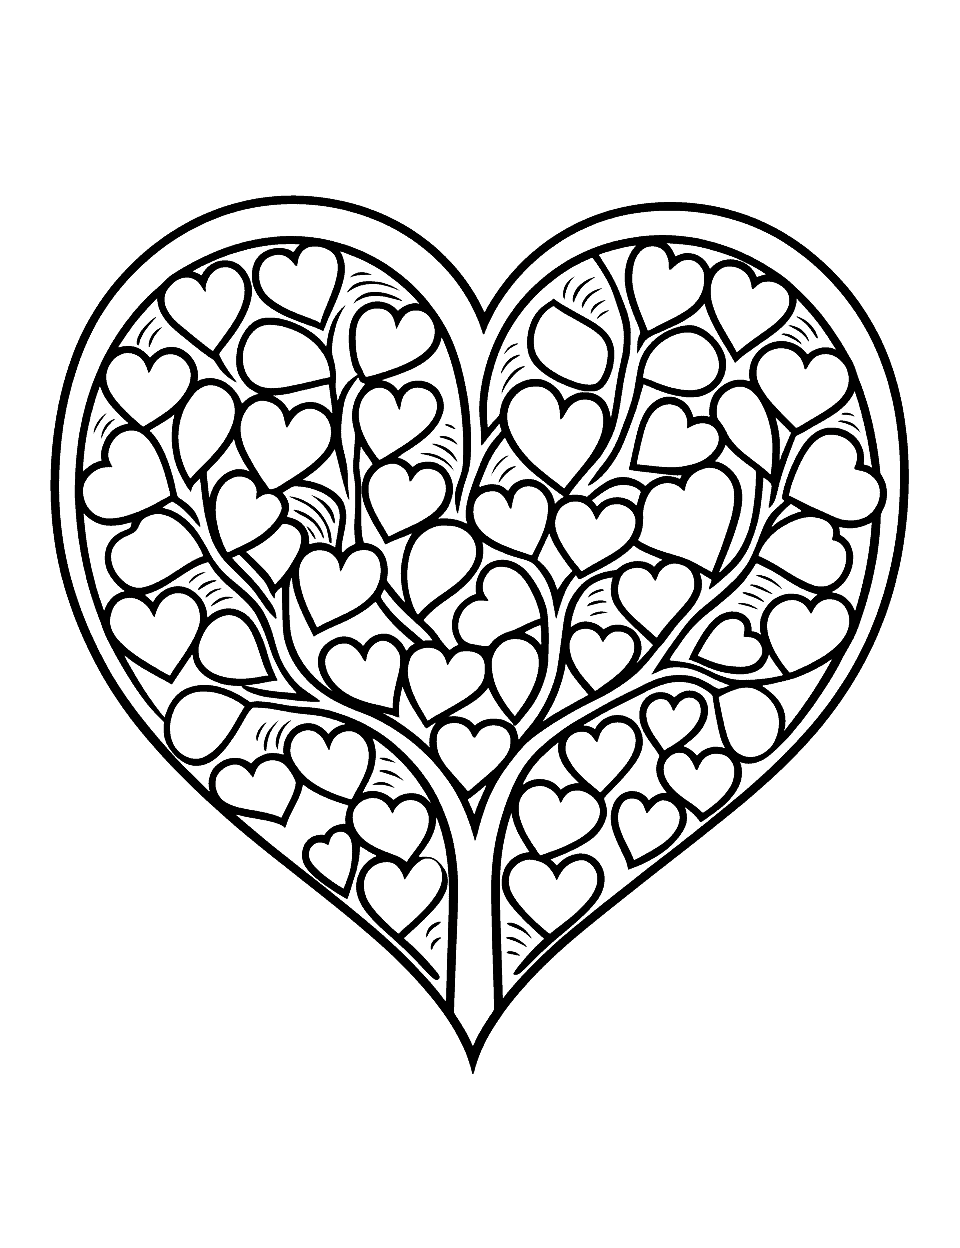 Heart Tree Coloring Page - A tree with heart-shaped leaves.